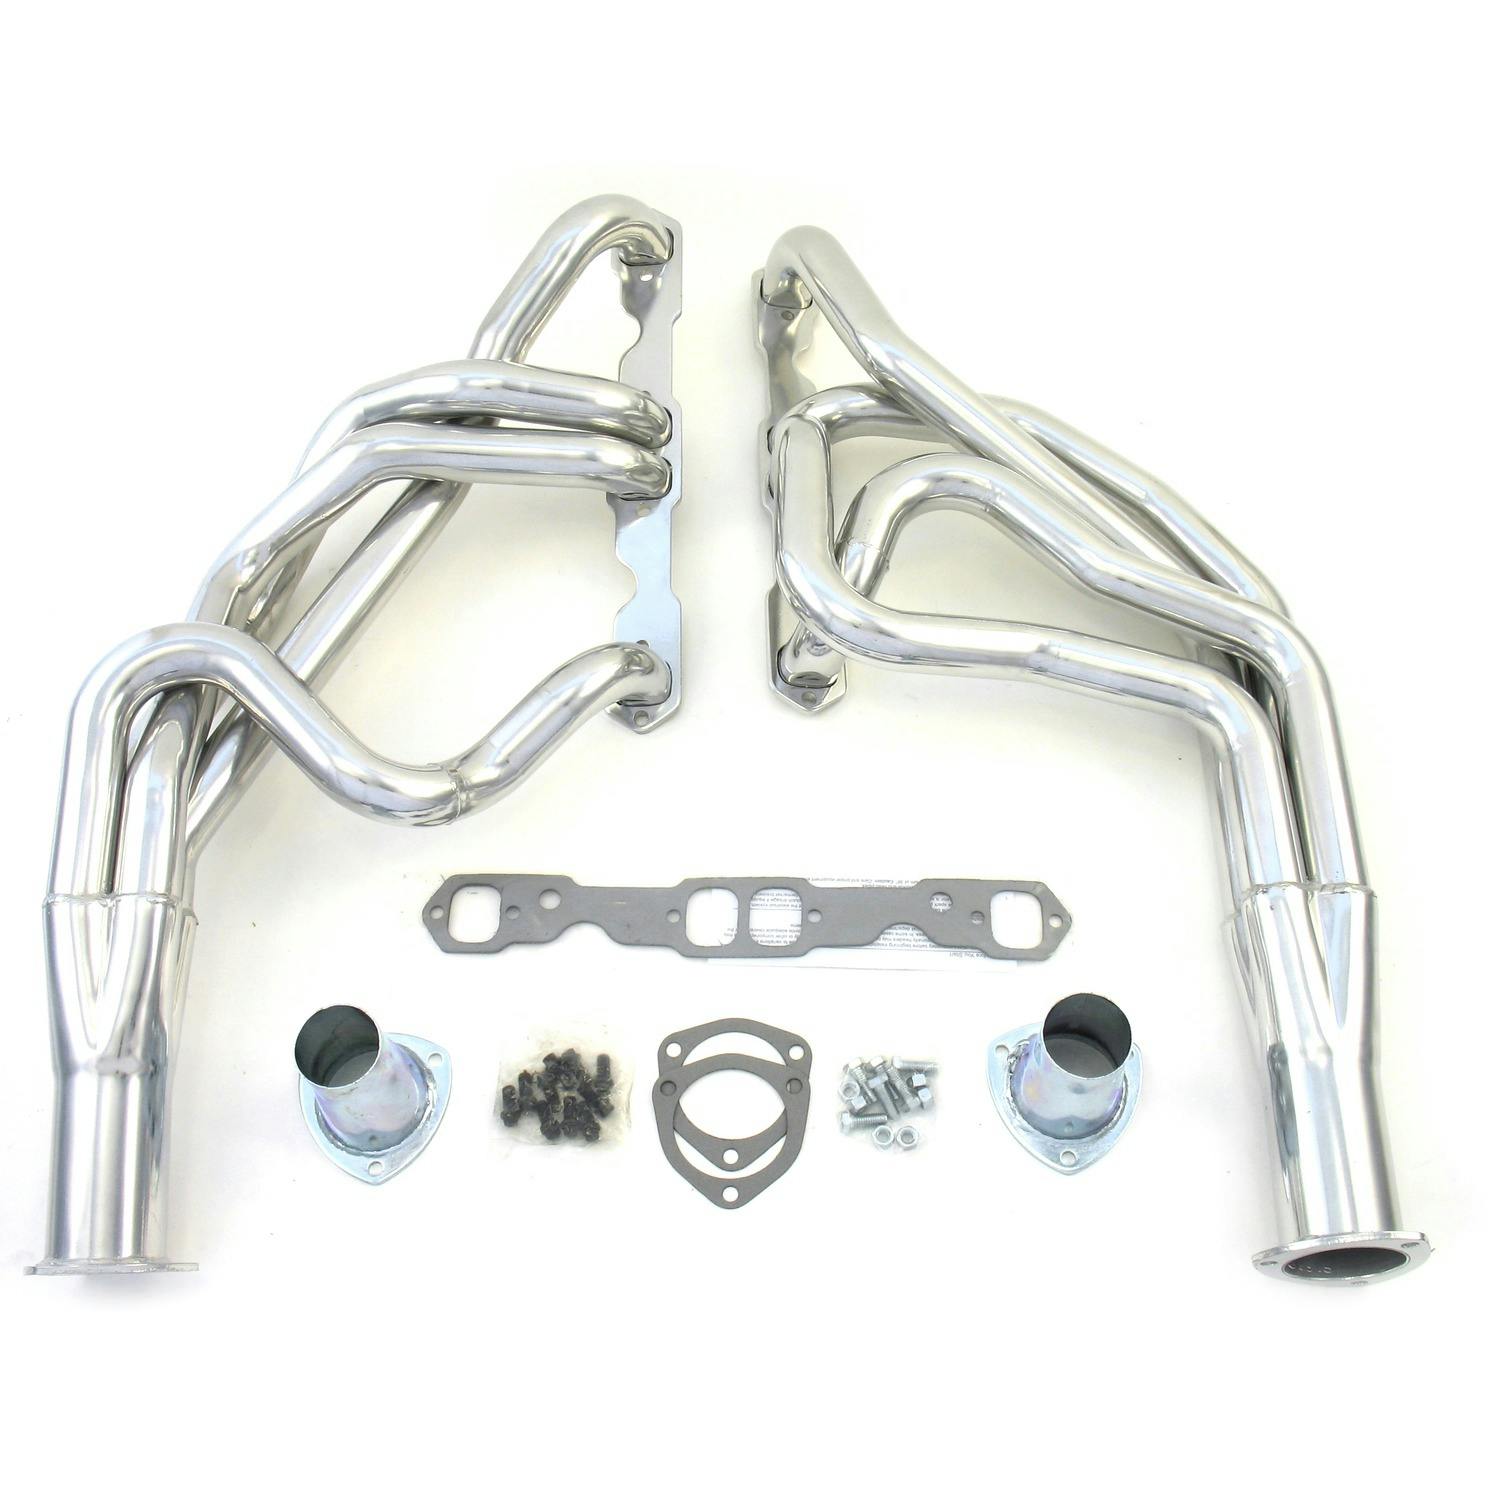 Patriot Exhaust H8057 1-3/4 Specific Fit Exhaust Header for Chevrolet Truck 4.8-6.0L 99-05 